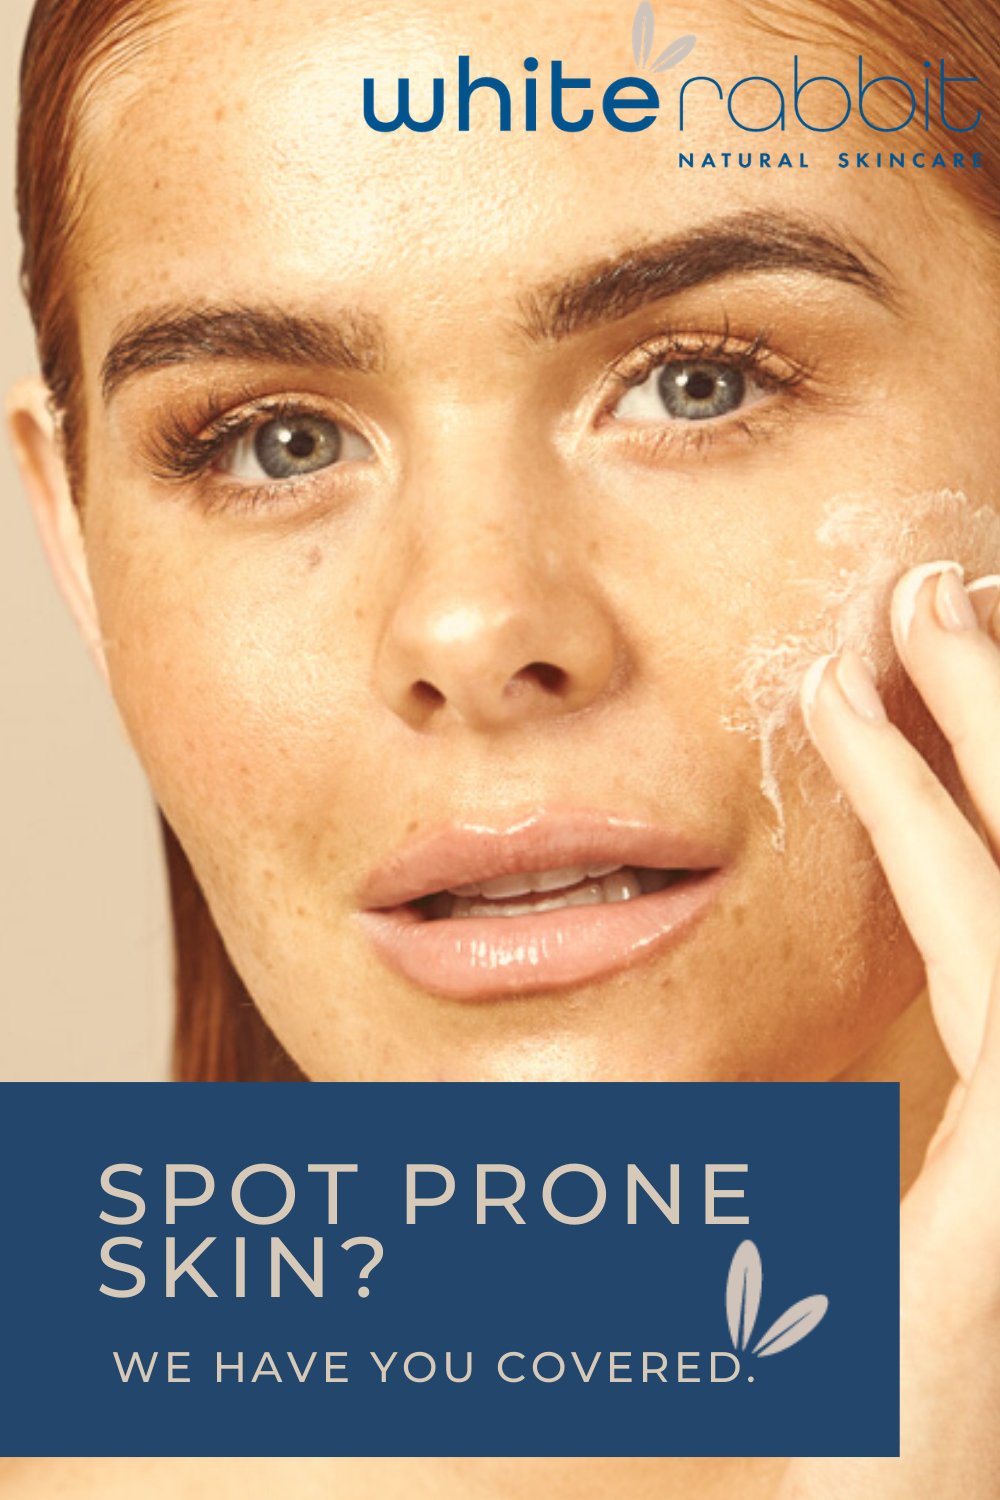 Spot prone skin? We have you covered - White Rabbit Skin Care